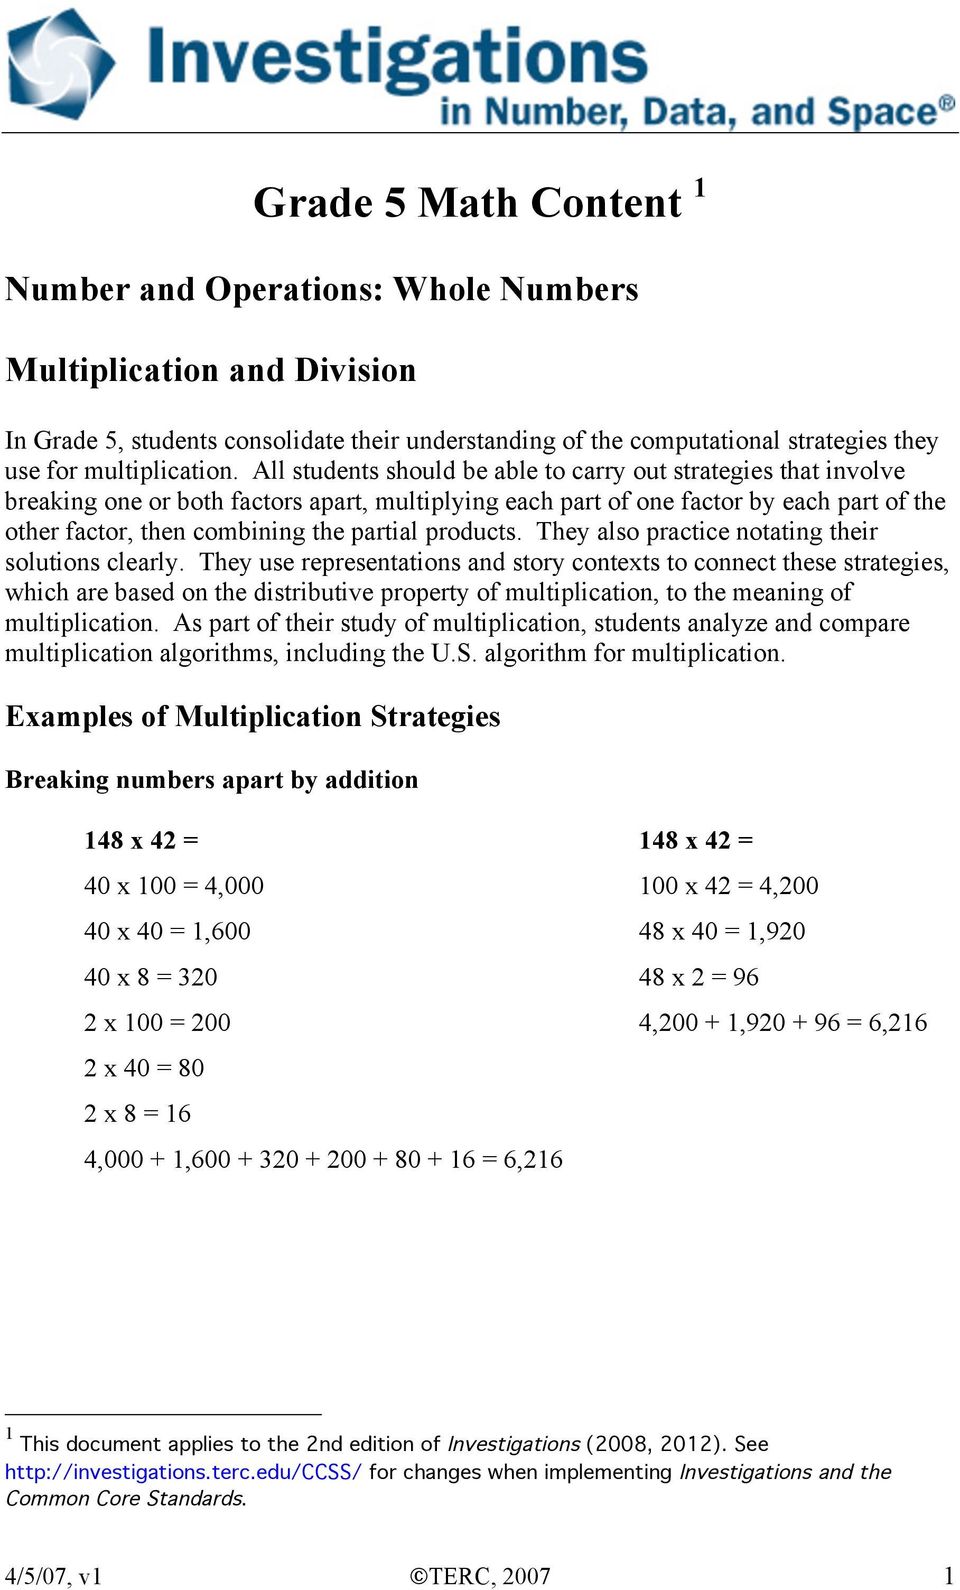 All students should be able to carry out strategies that involve breaking one or both factors apart, multiplying each part of one factor by each part of the other factor, then combining the partial